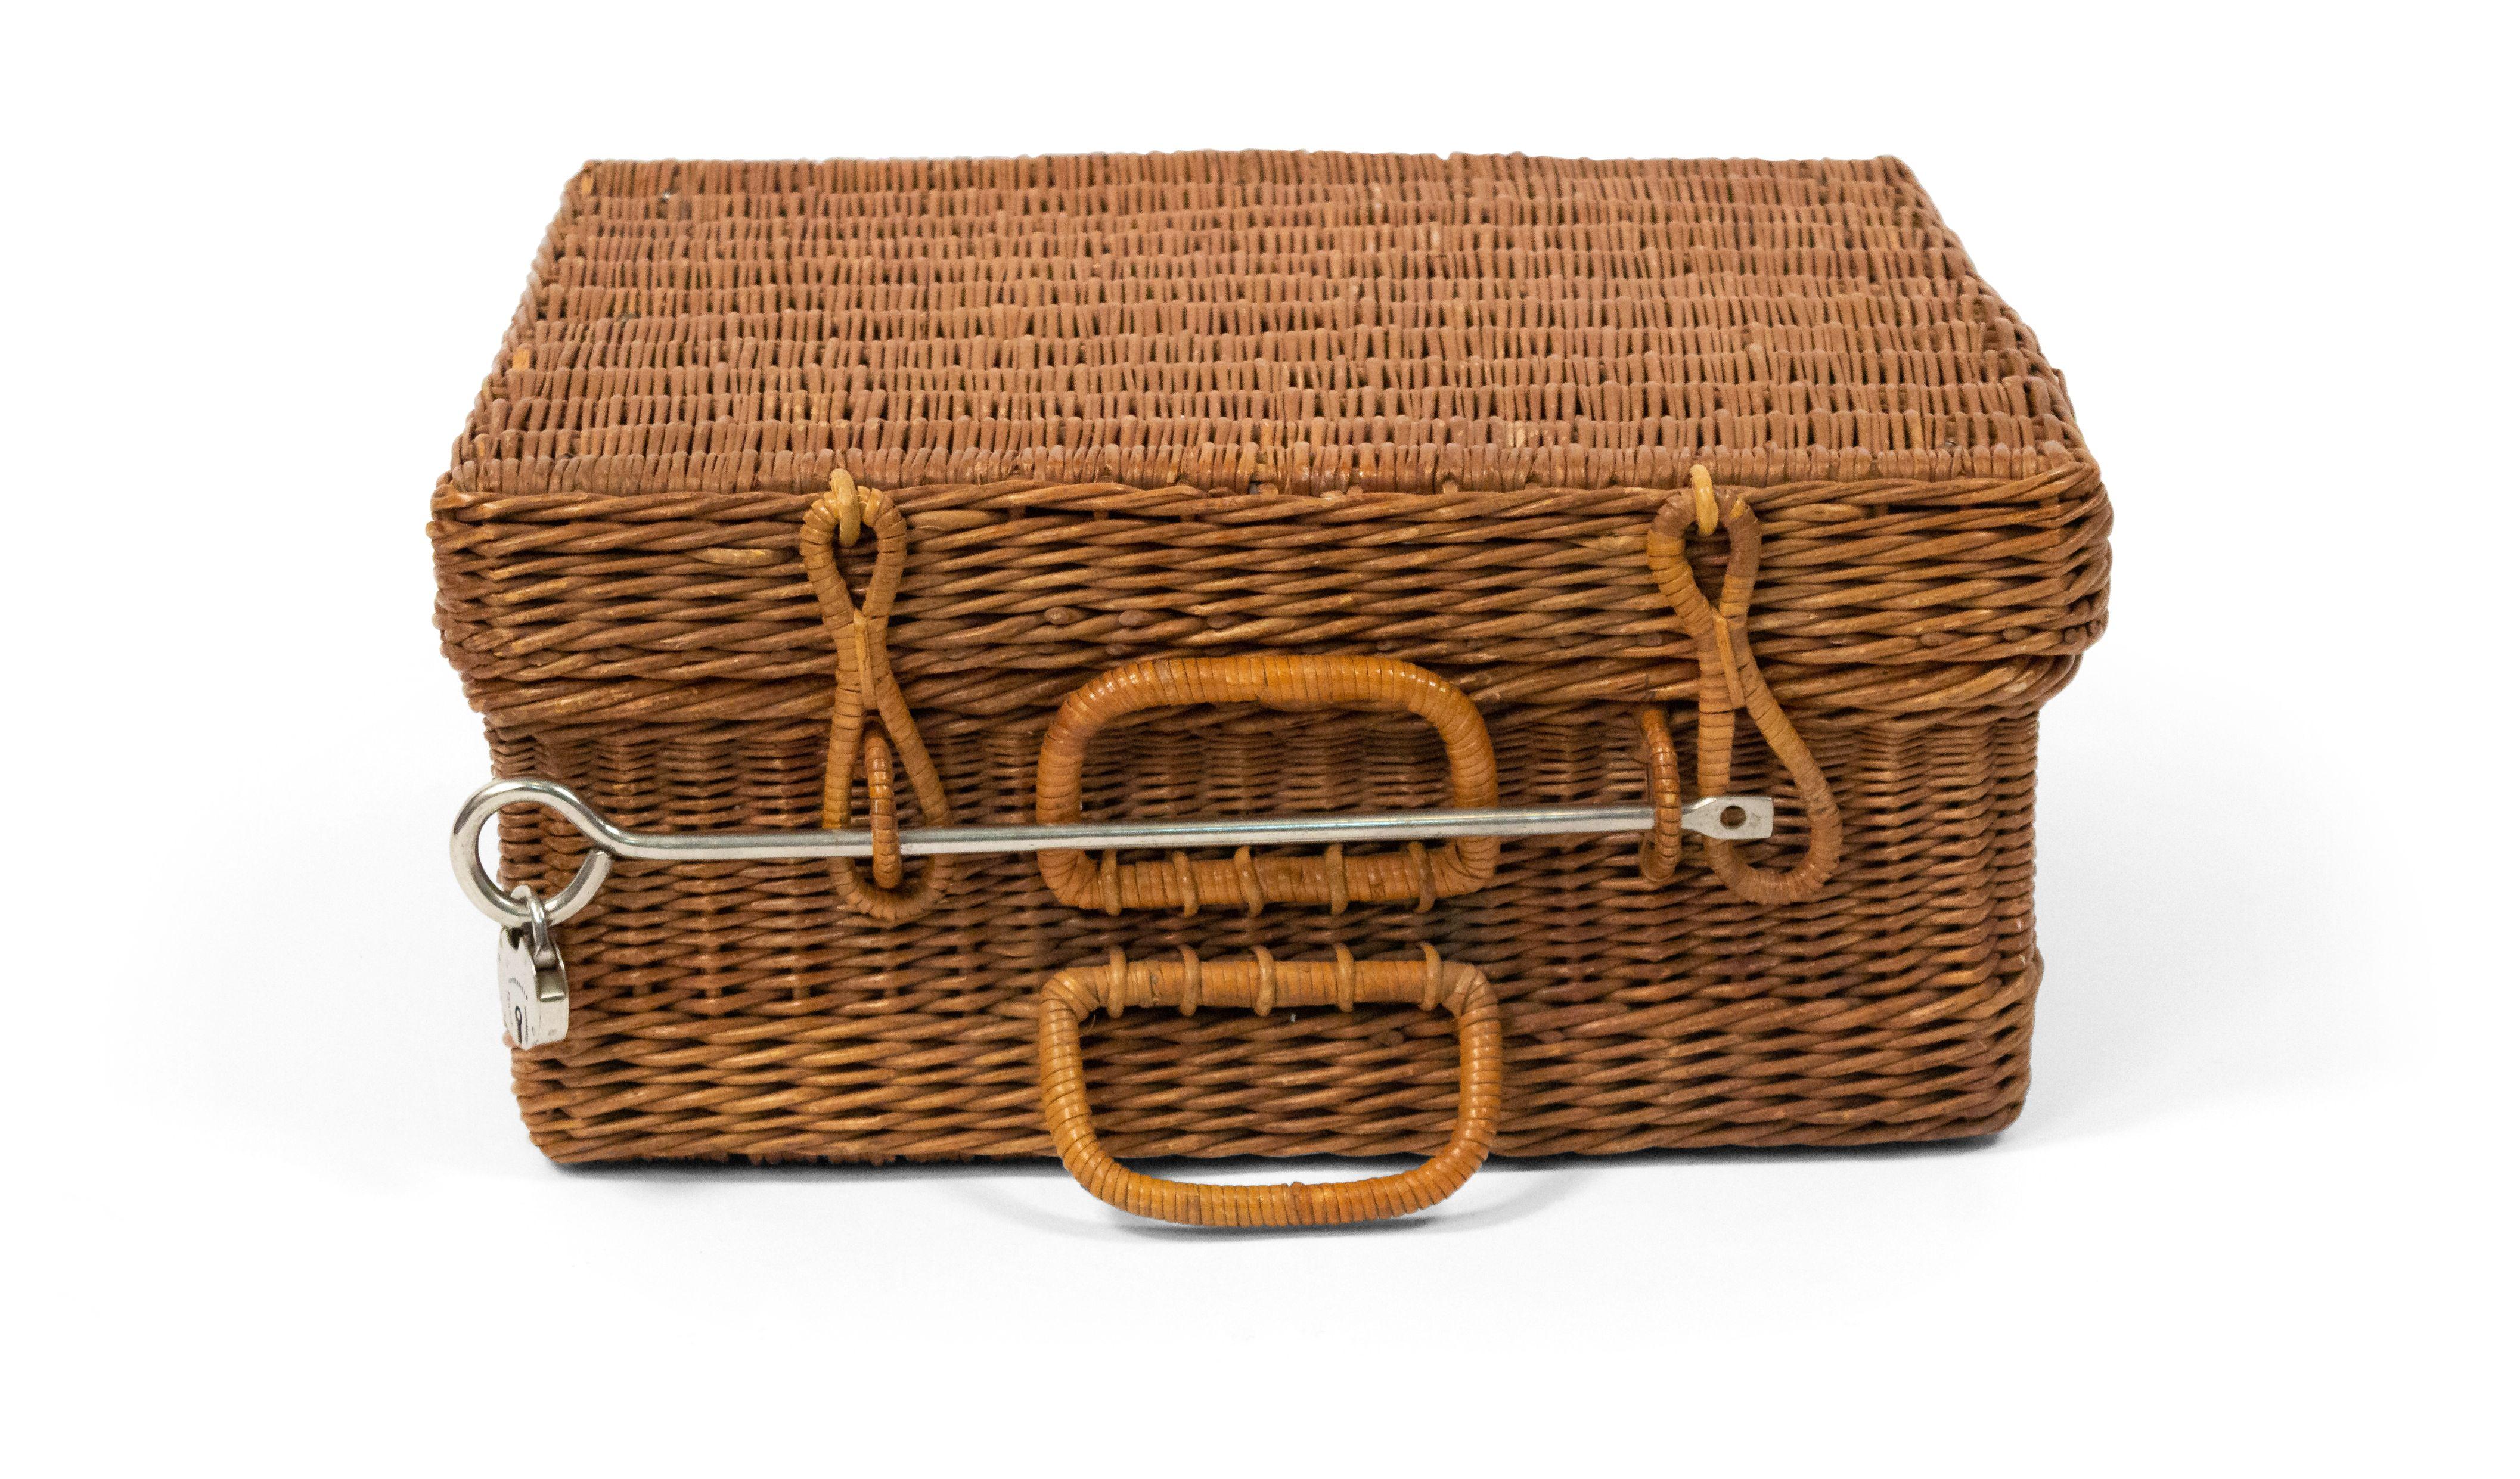 English Wicker (1930s) natural wicker picnic basket with fitted interior. (bottles, cups, plates, etc.).
  